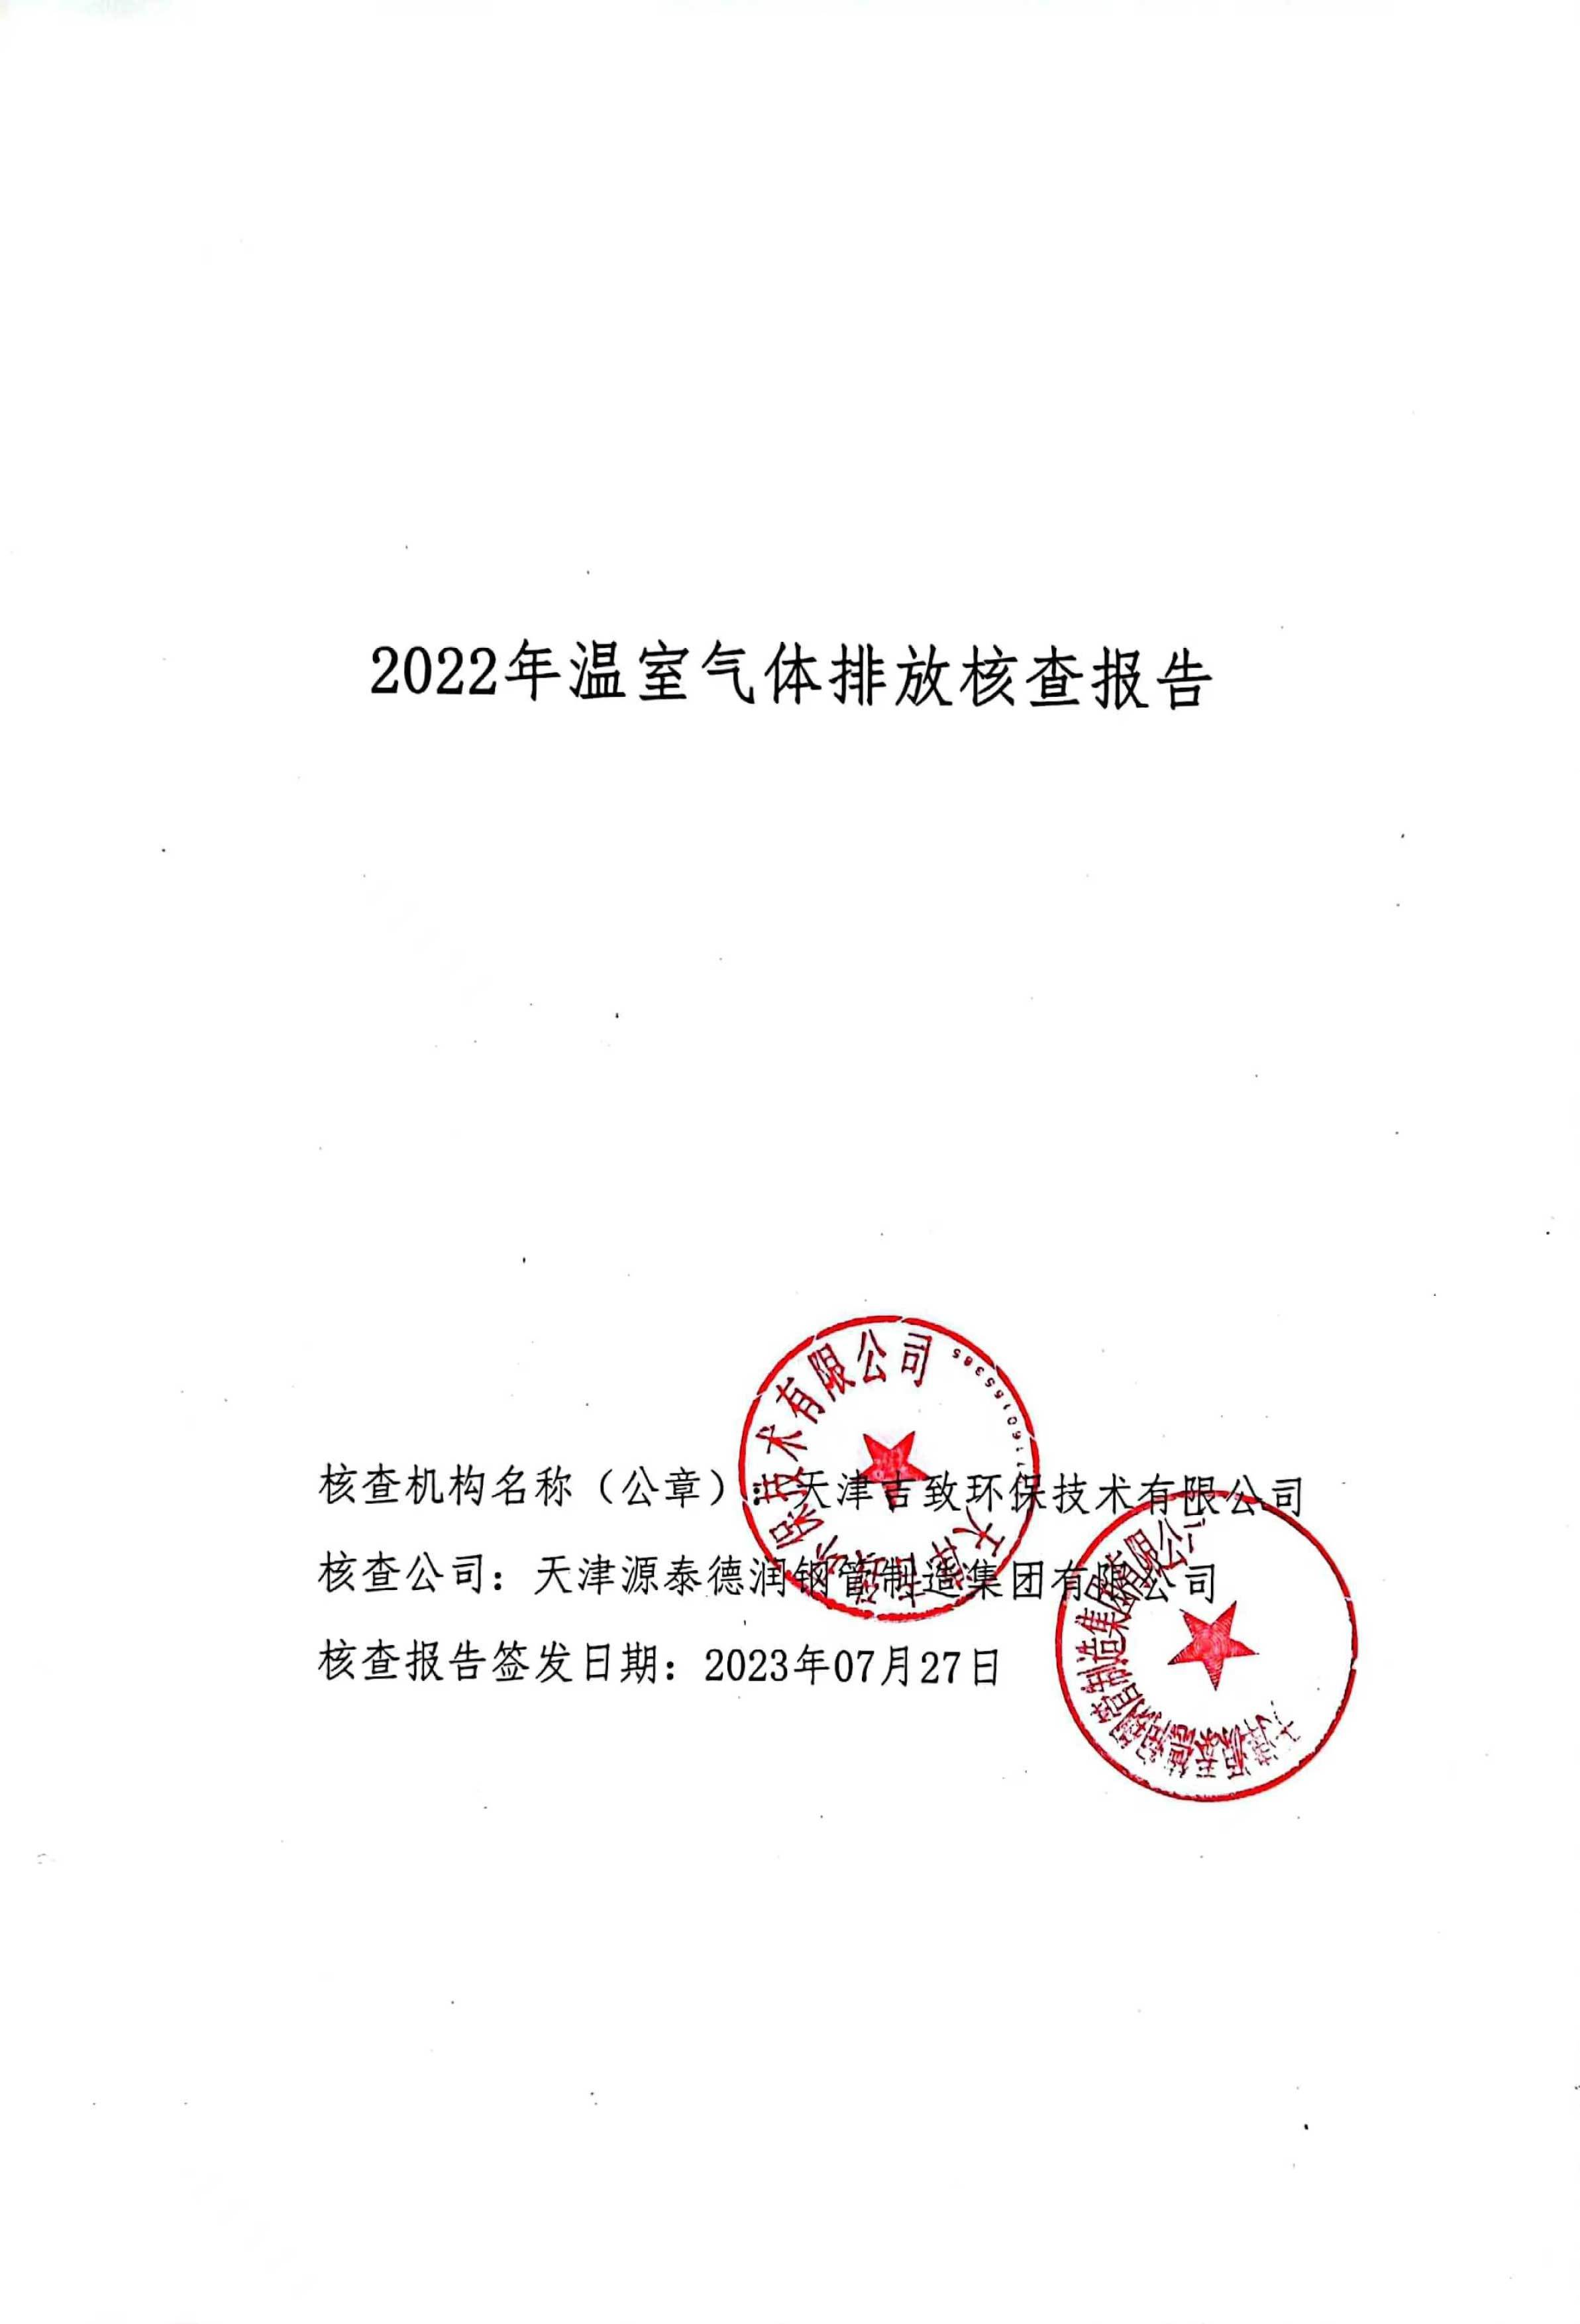 Yuantai Derun steel pipe Group 2022 annual greenhouse gas emissions verification report